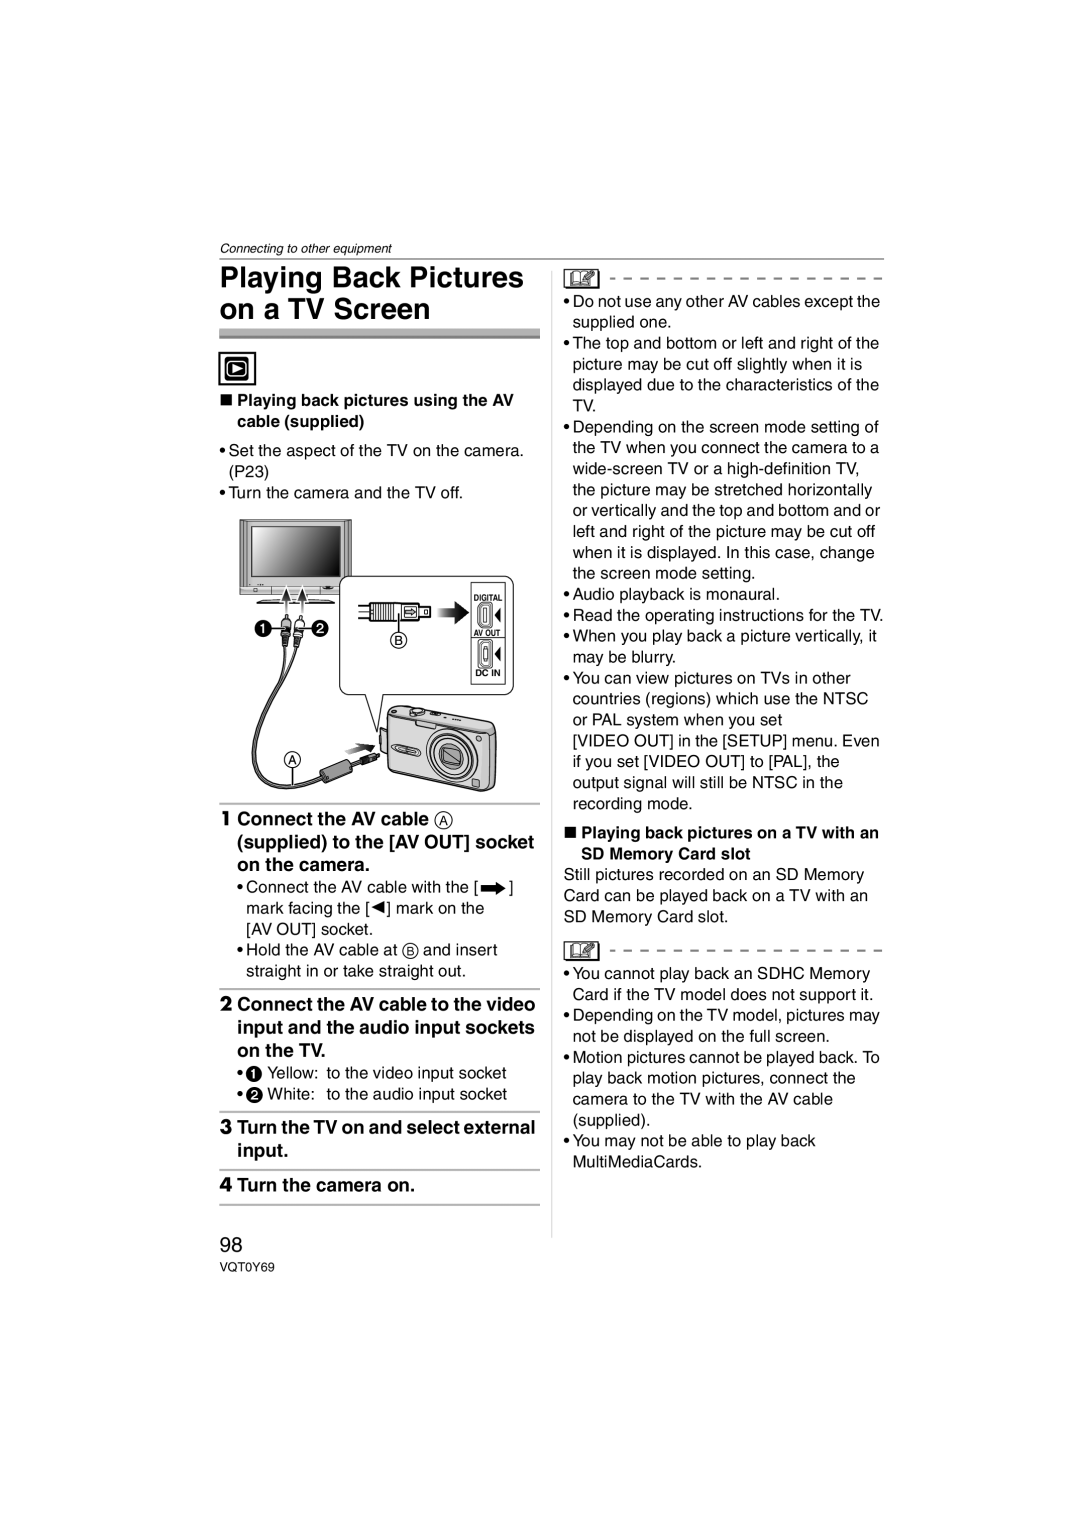 Panasonic DMC-FX07 Playing Back Pictures on a TV Screen, Turn the TV on and select external input 4 Turn the camera on 